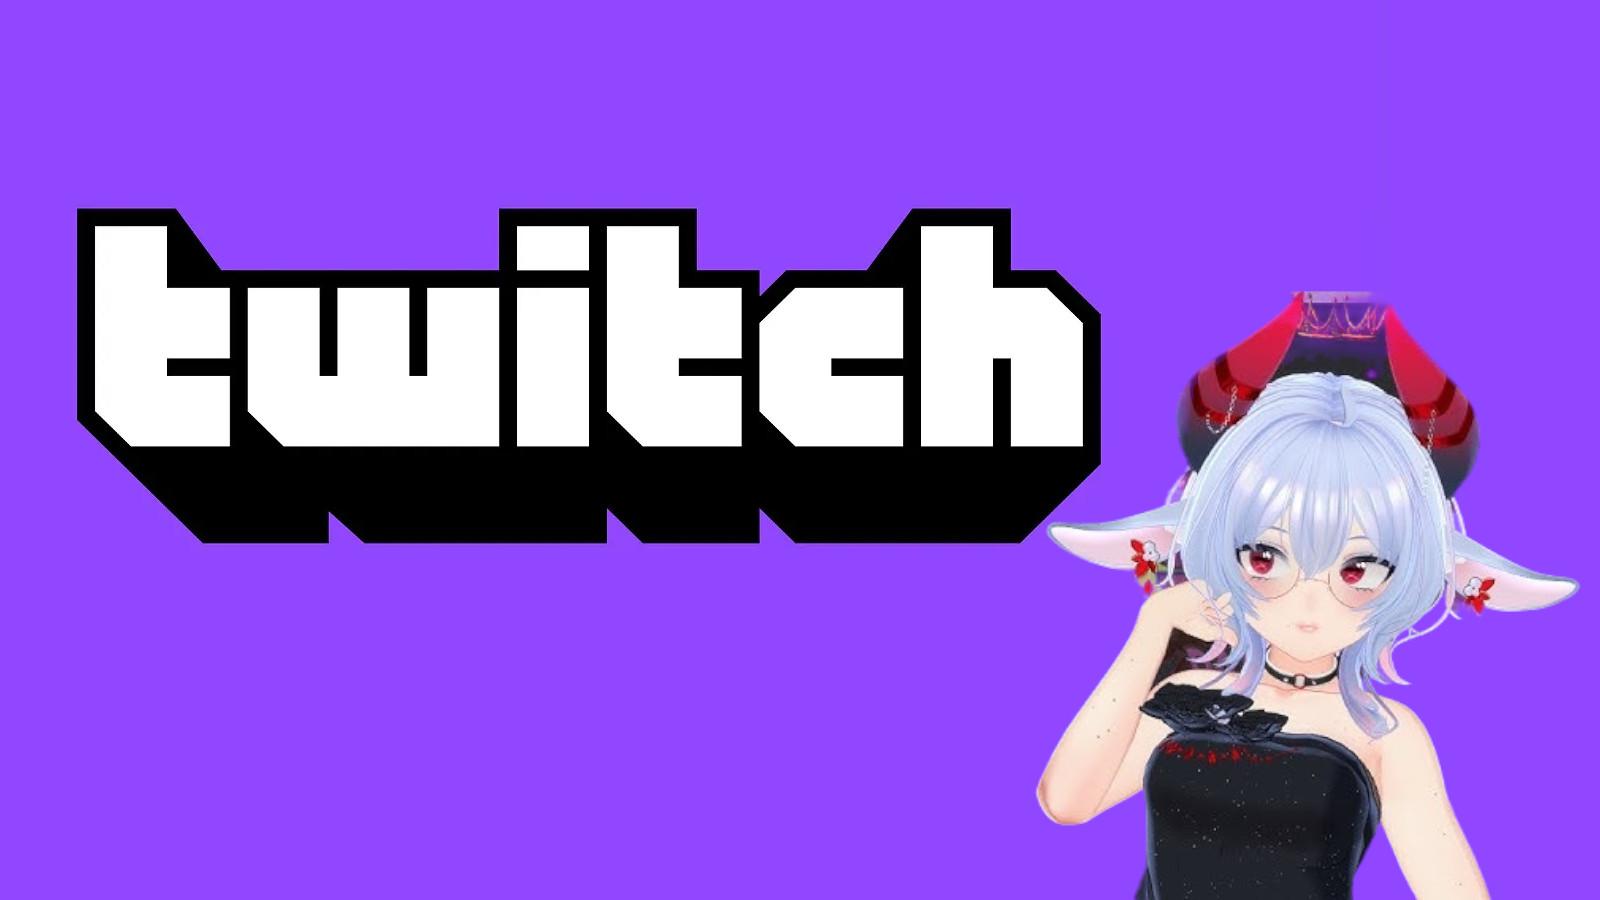 VTuber Ley Ley confused about vrchat rule changes on twitch